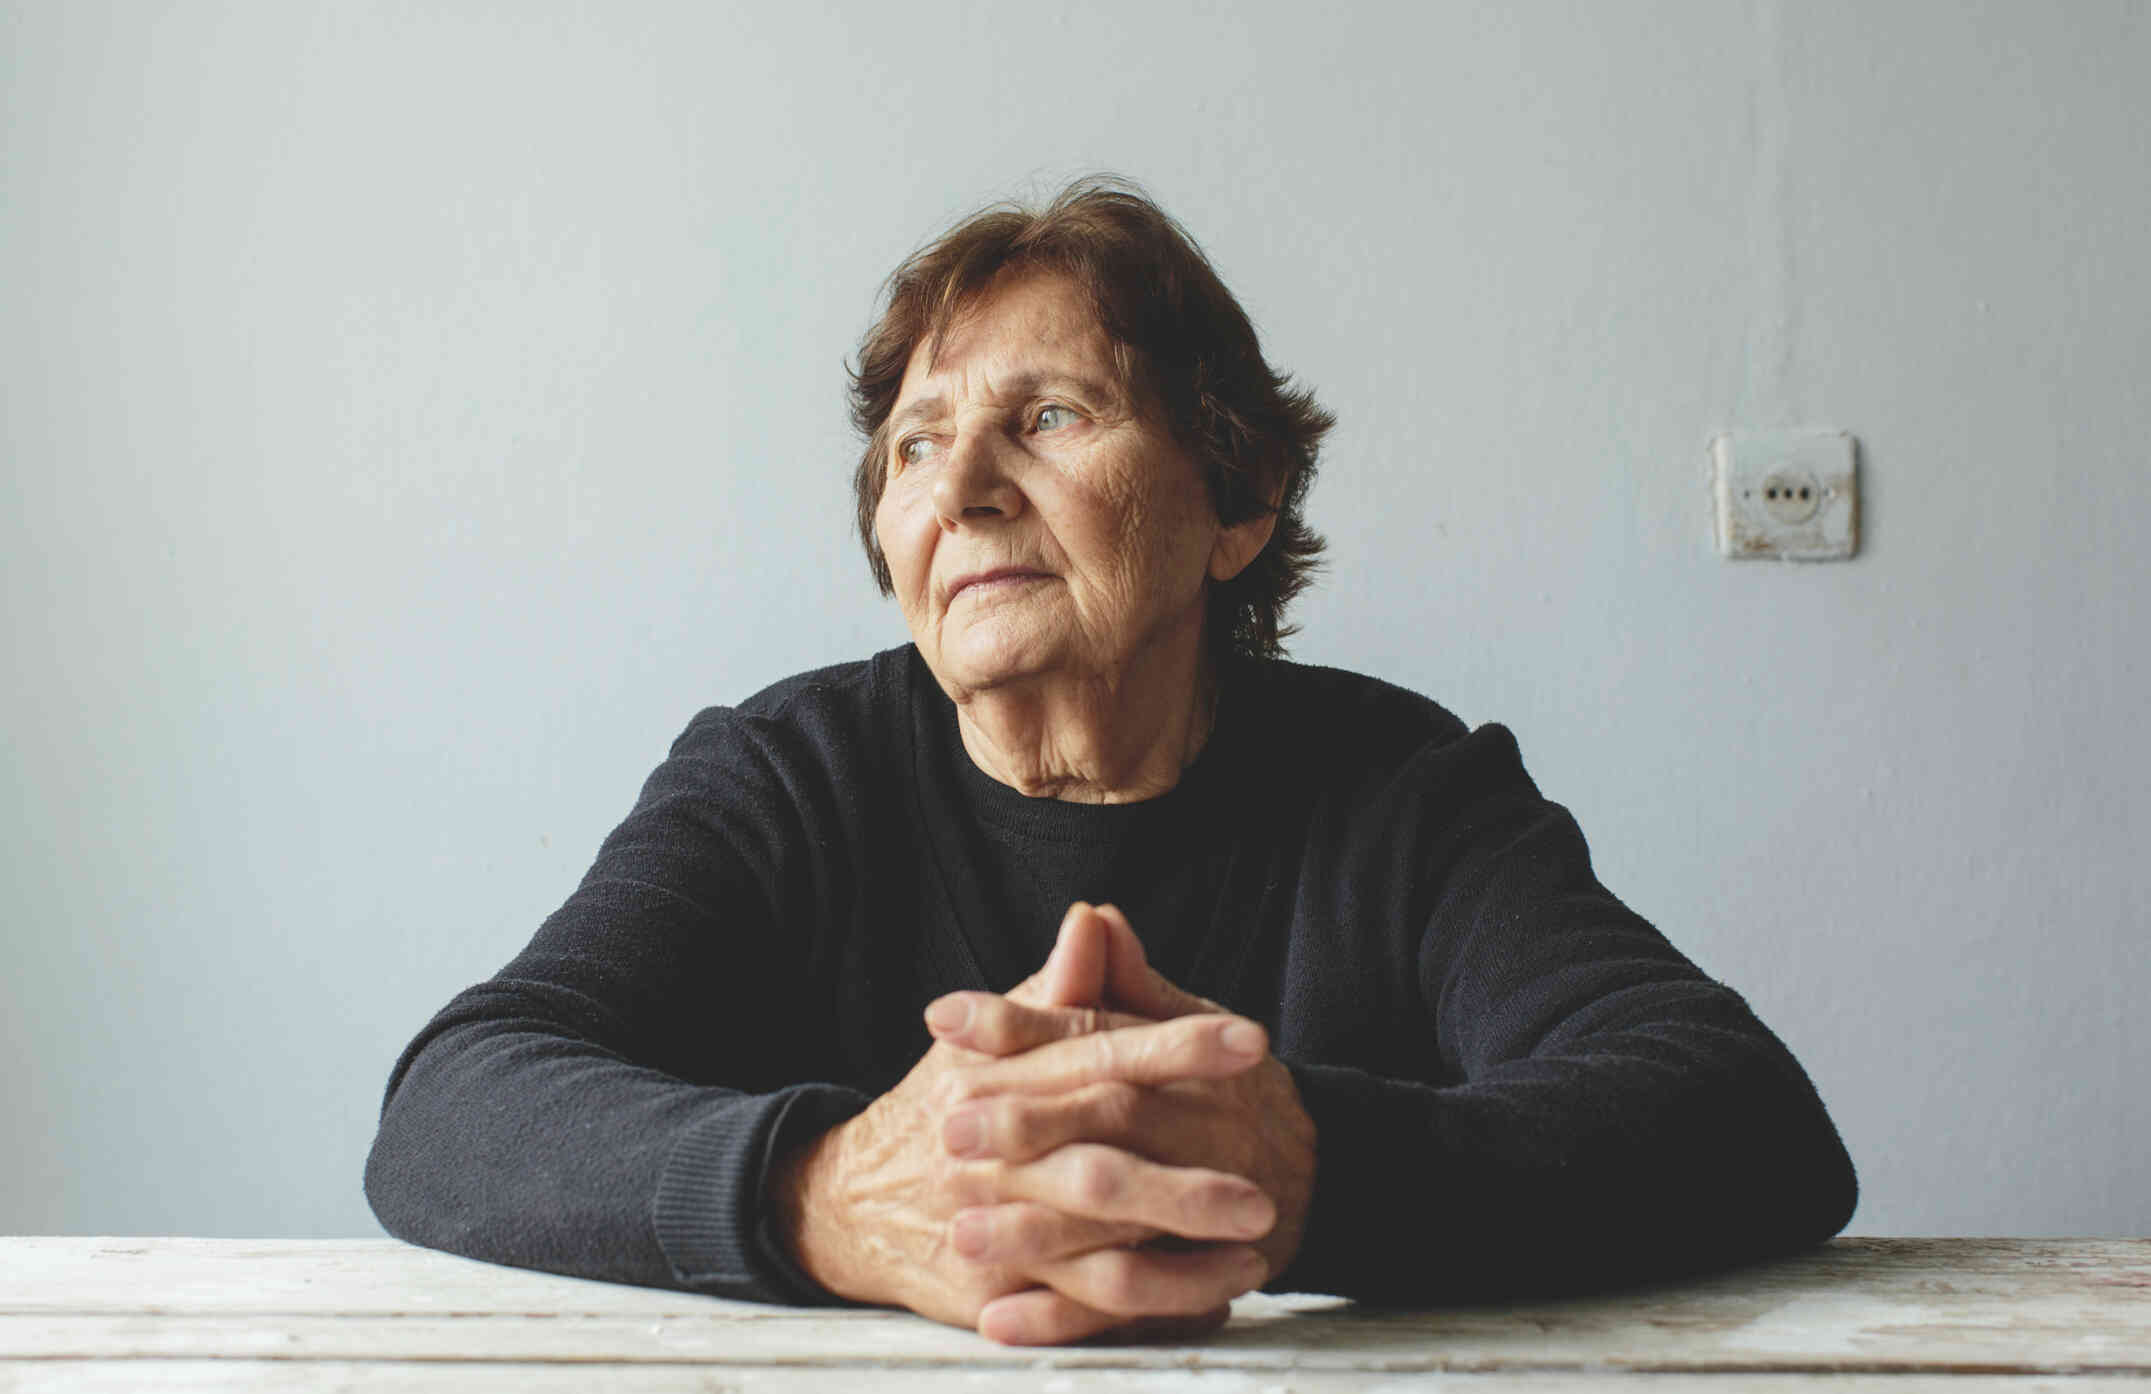 A mature woman in a black shirt sits at a table and presses her hands together while sadly gazing off.